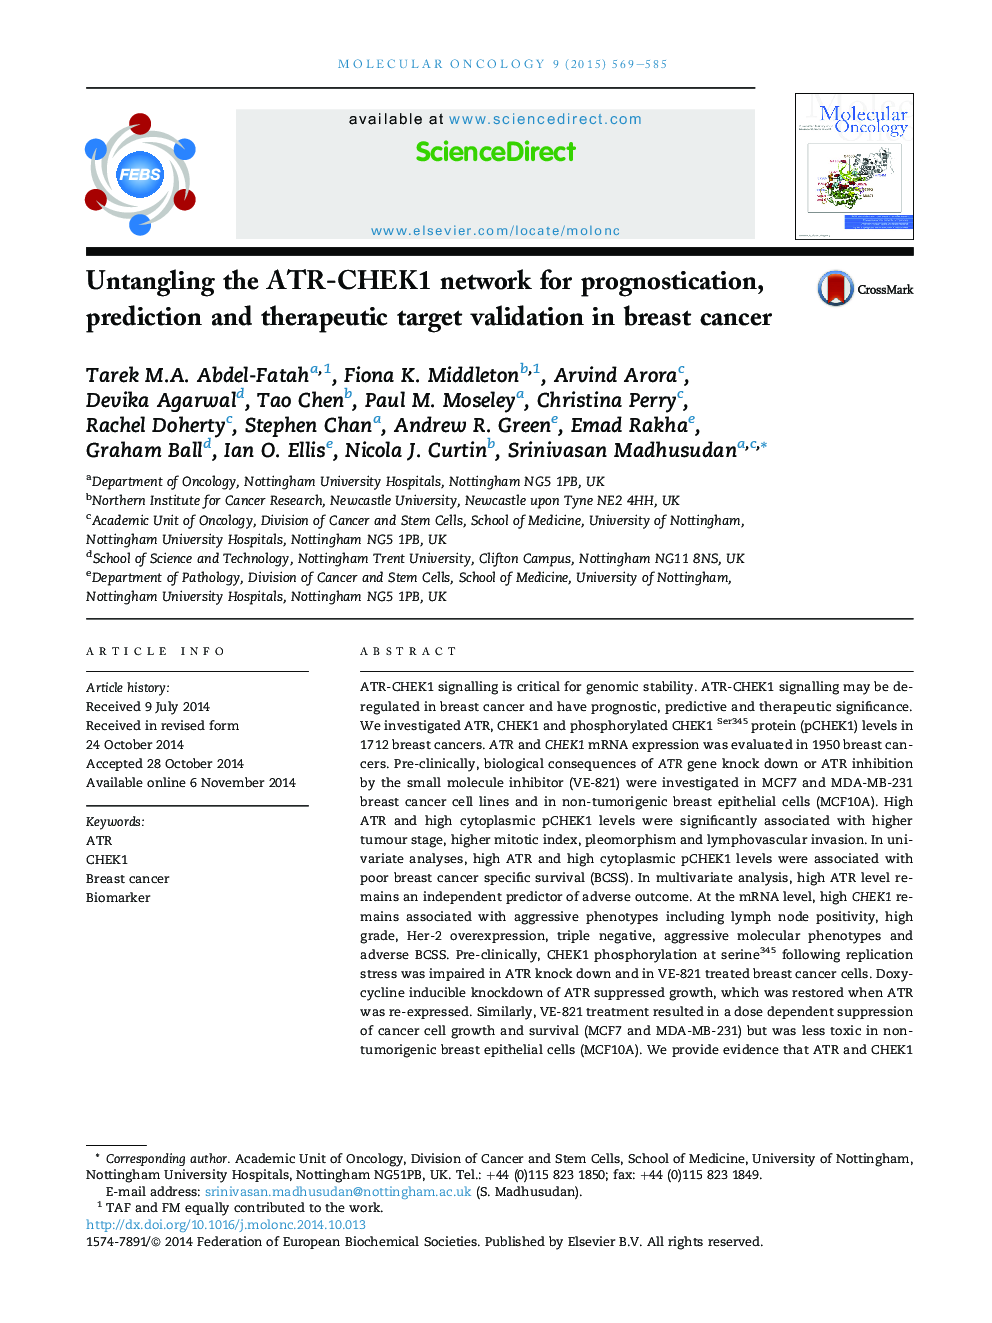 Untangling the ATR-CHEK1 network for prognostication, prediction and therapeutic target validation in breast cancer